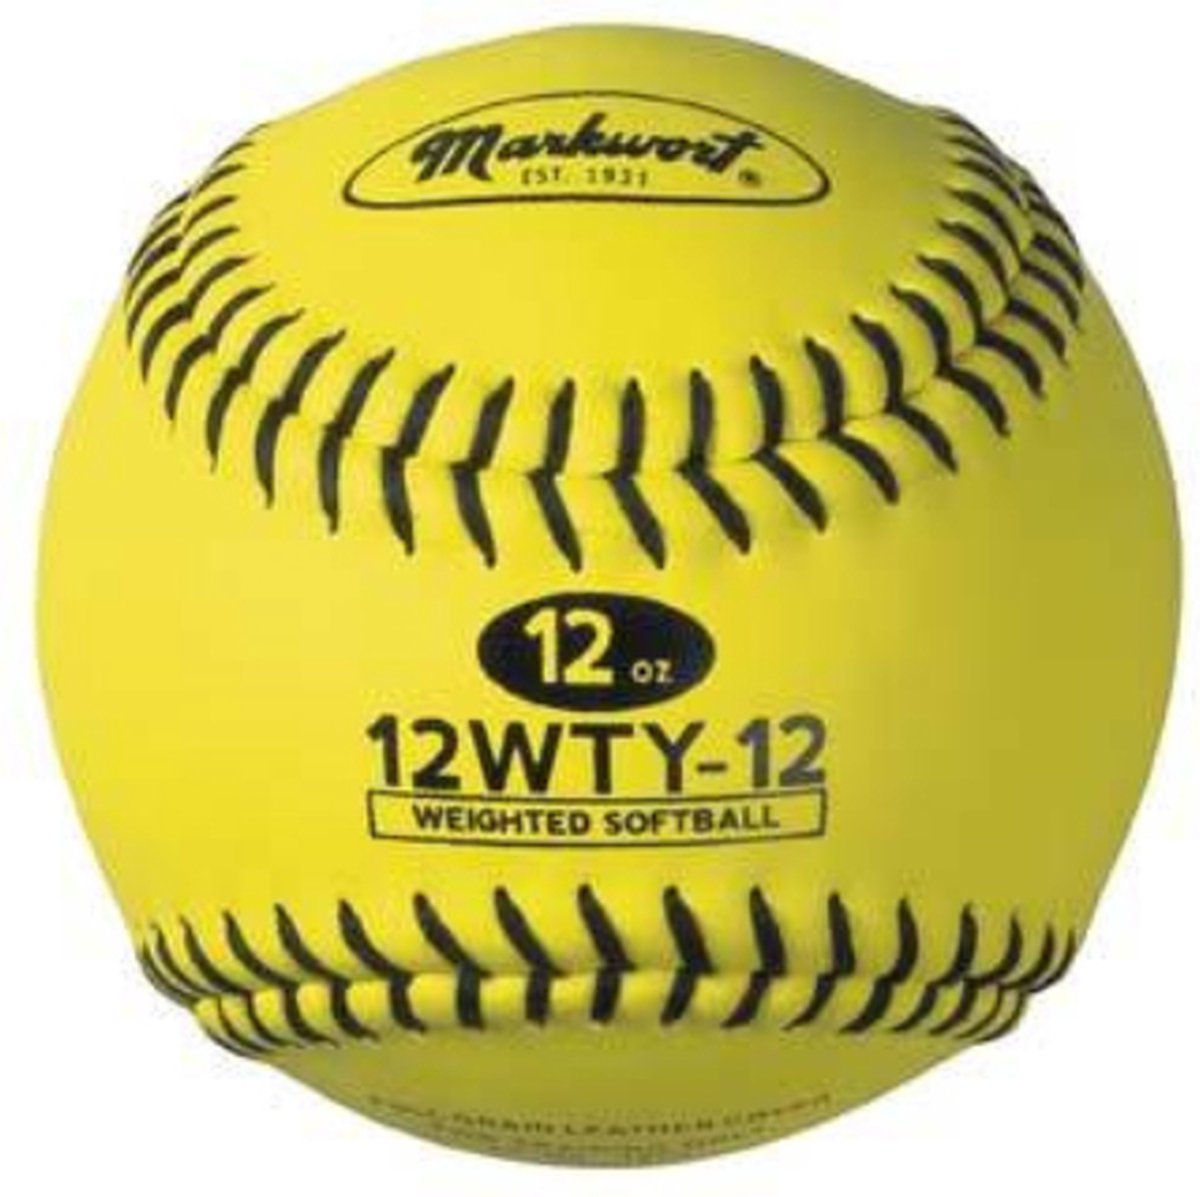 Markwort Weighted Yellow Leather Softball (12WT Weight 12 oz